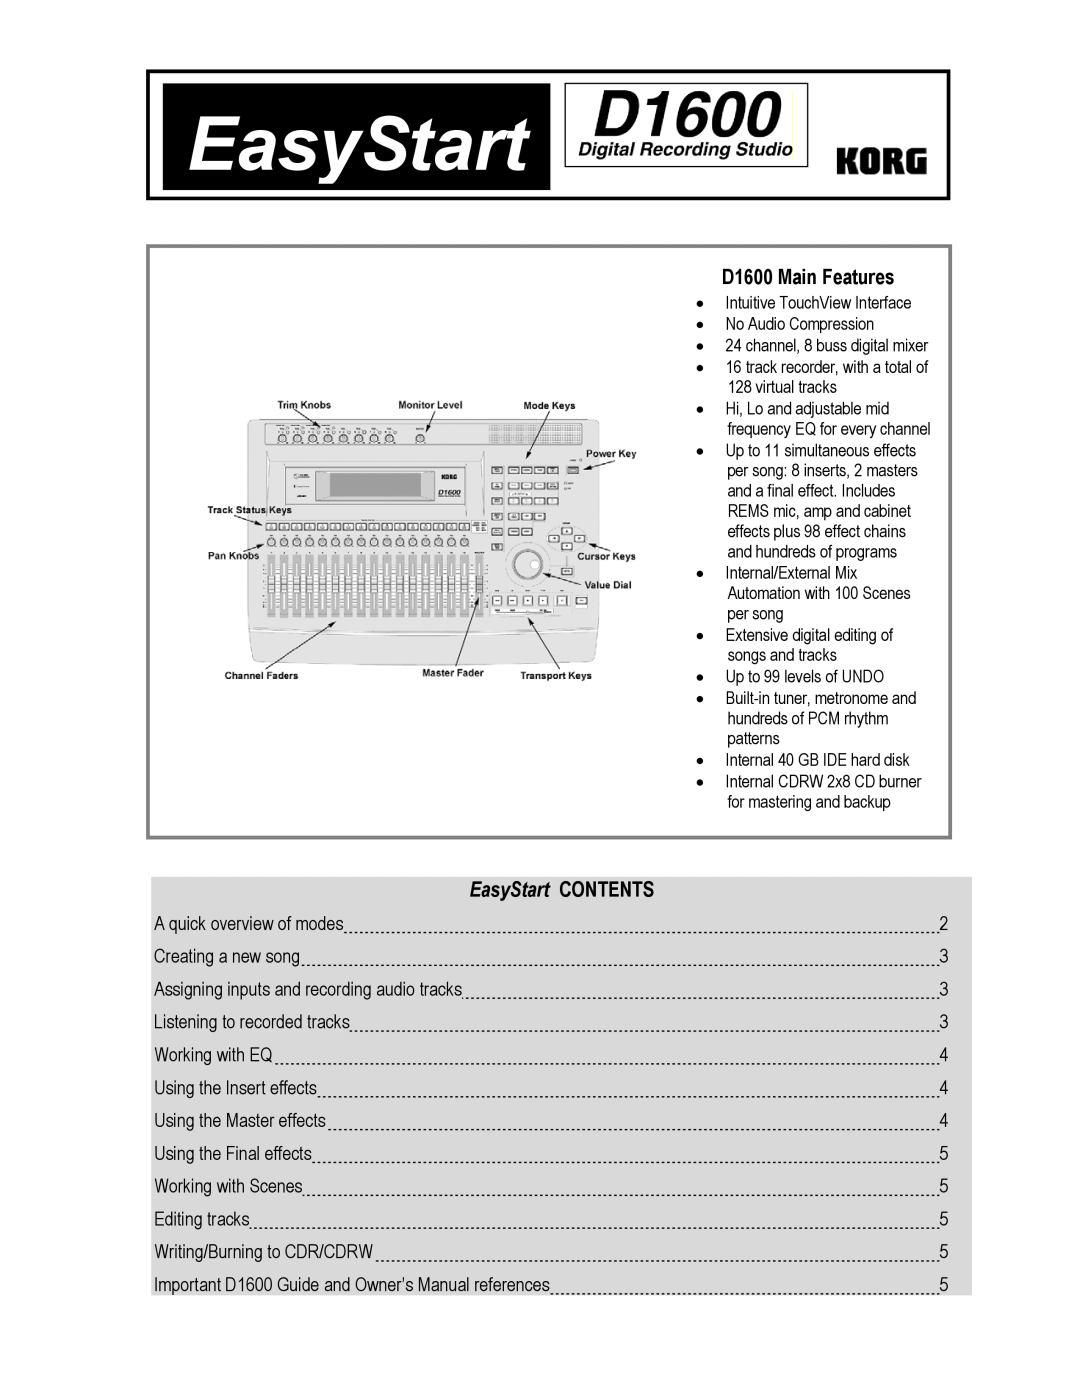 Korg owner manual D1600 Main Features, EasyStart CONTENTS 